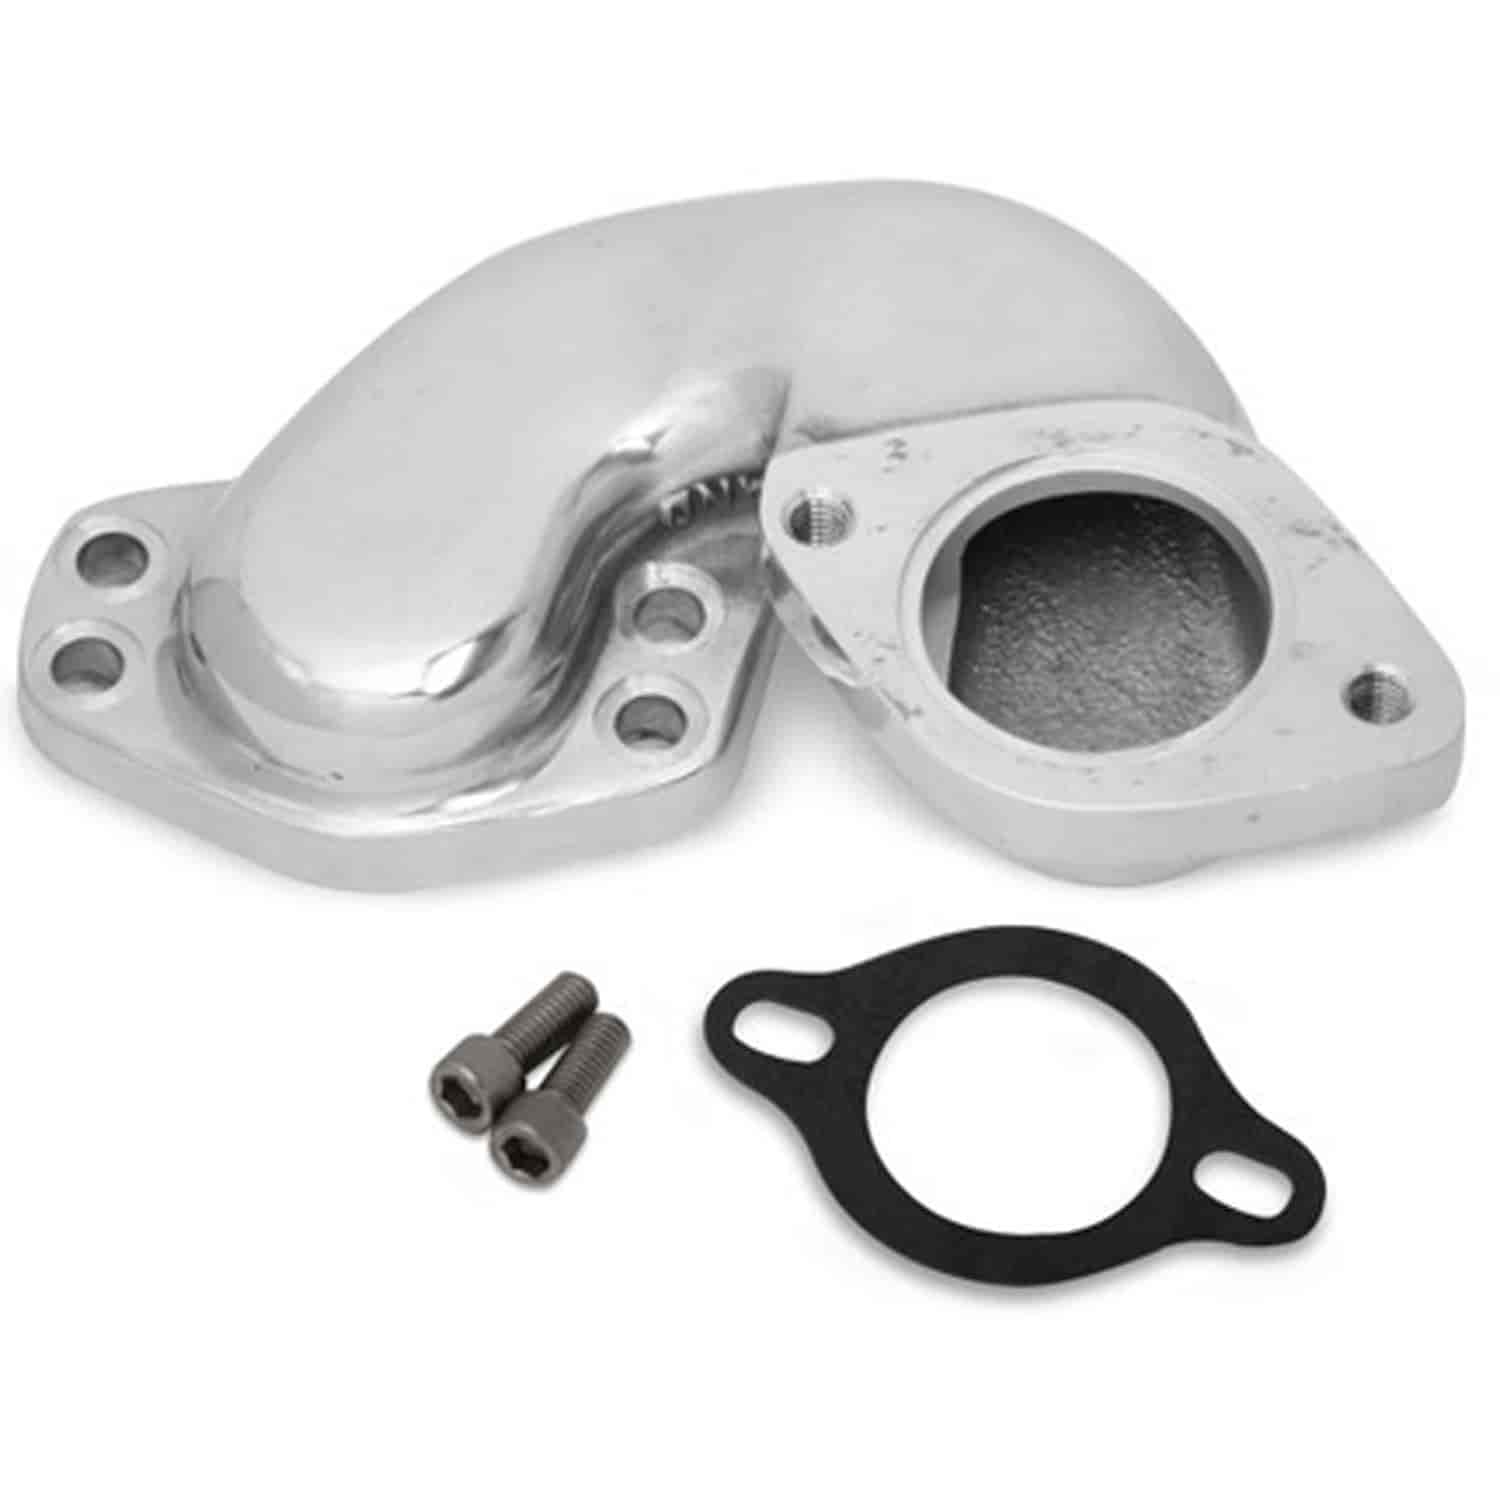 Offset Thermostat Housing Adapter For Small Block and Big Block Chevy Marine applications